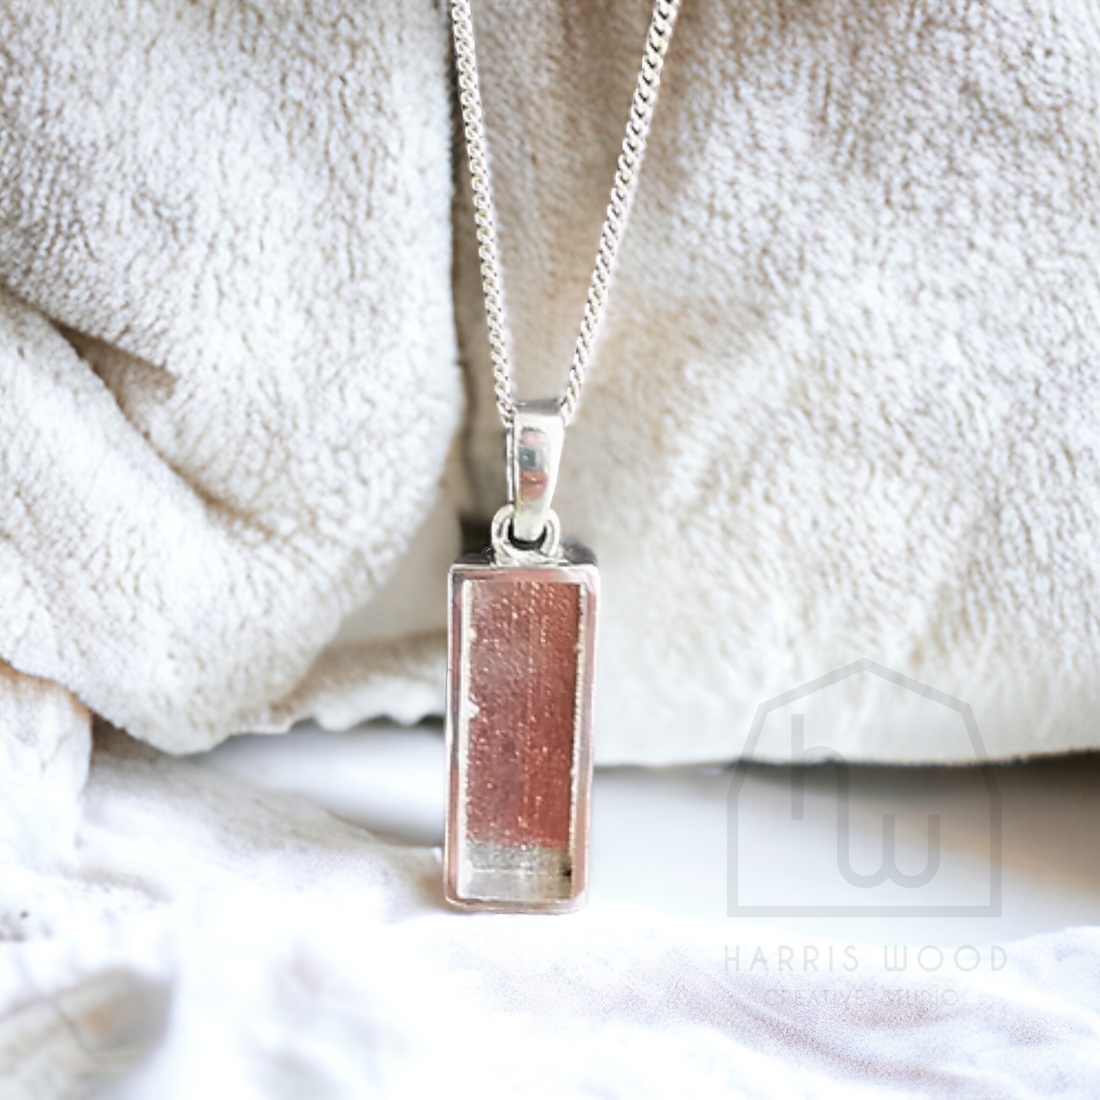 Oblong Solid Silver Setting Pendant